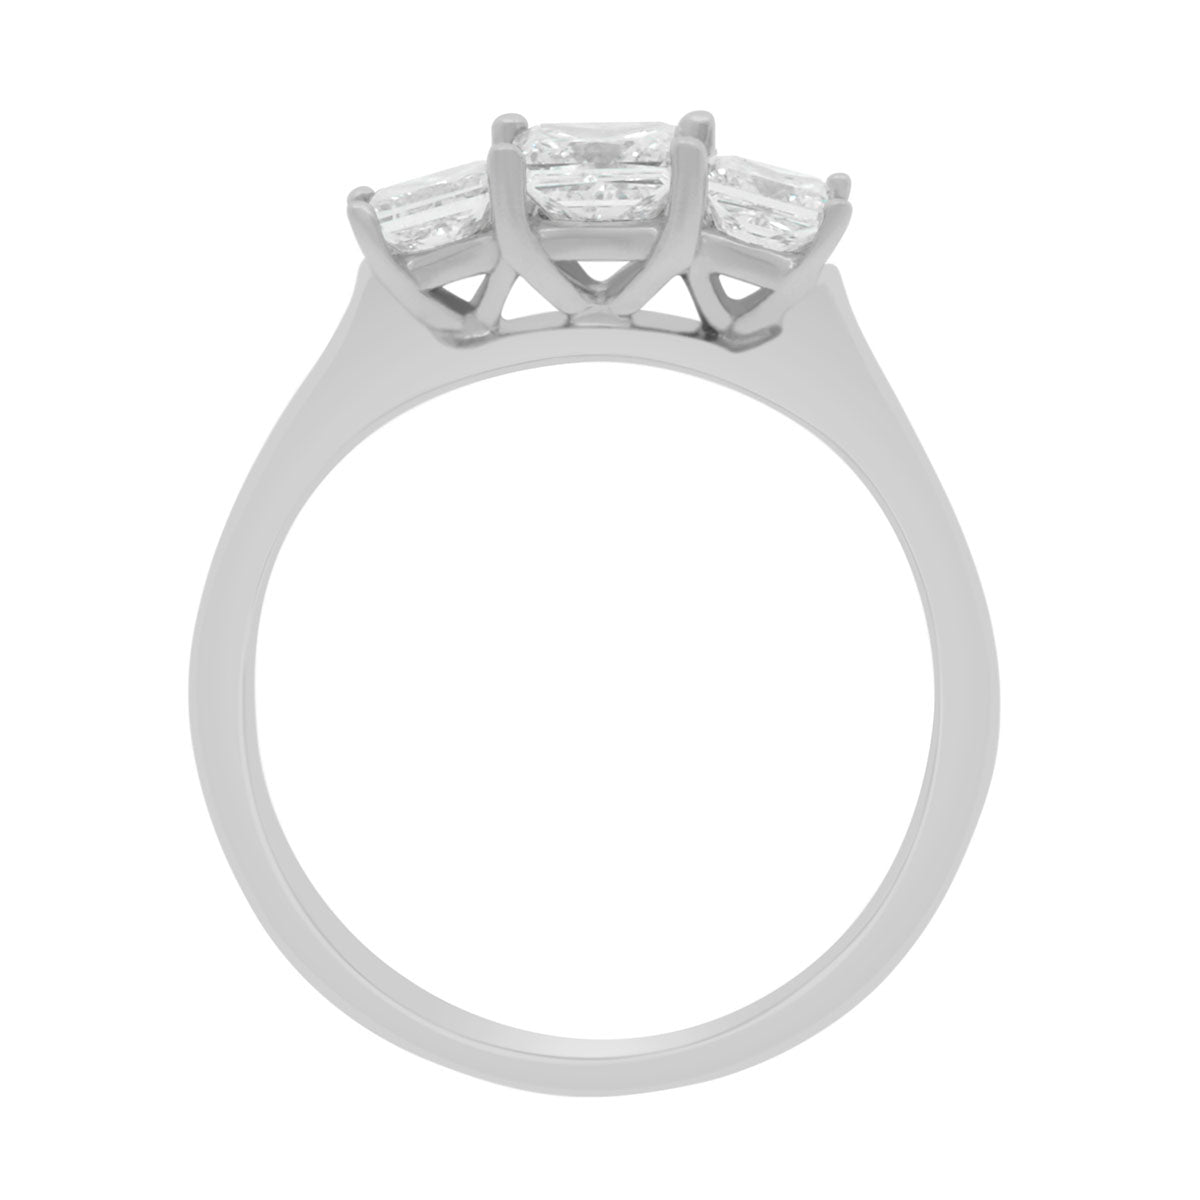 Princess Cut Trilogy Engagement Ring in white gold standing upright